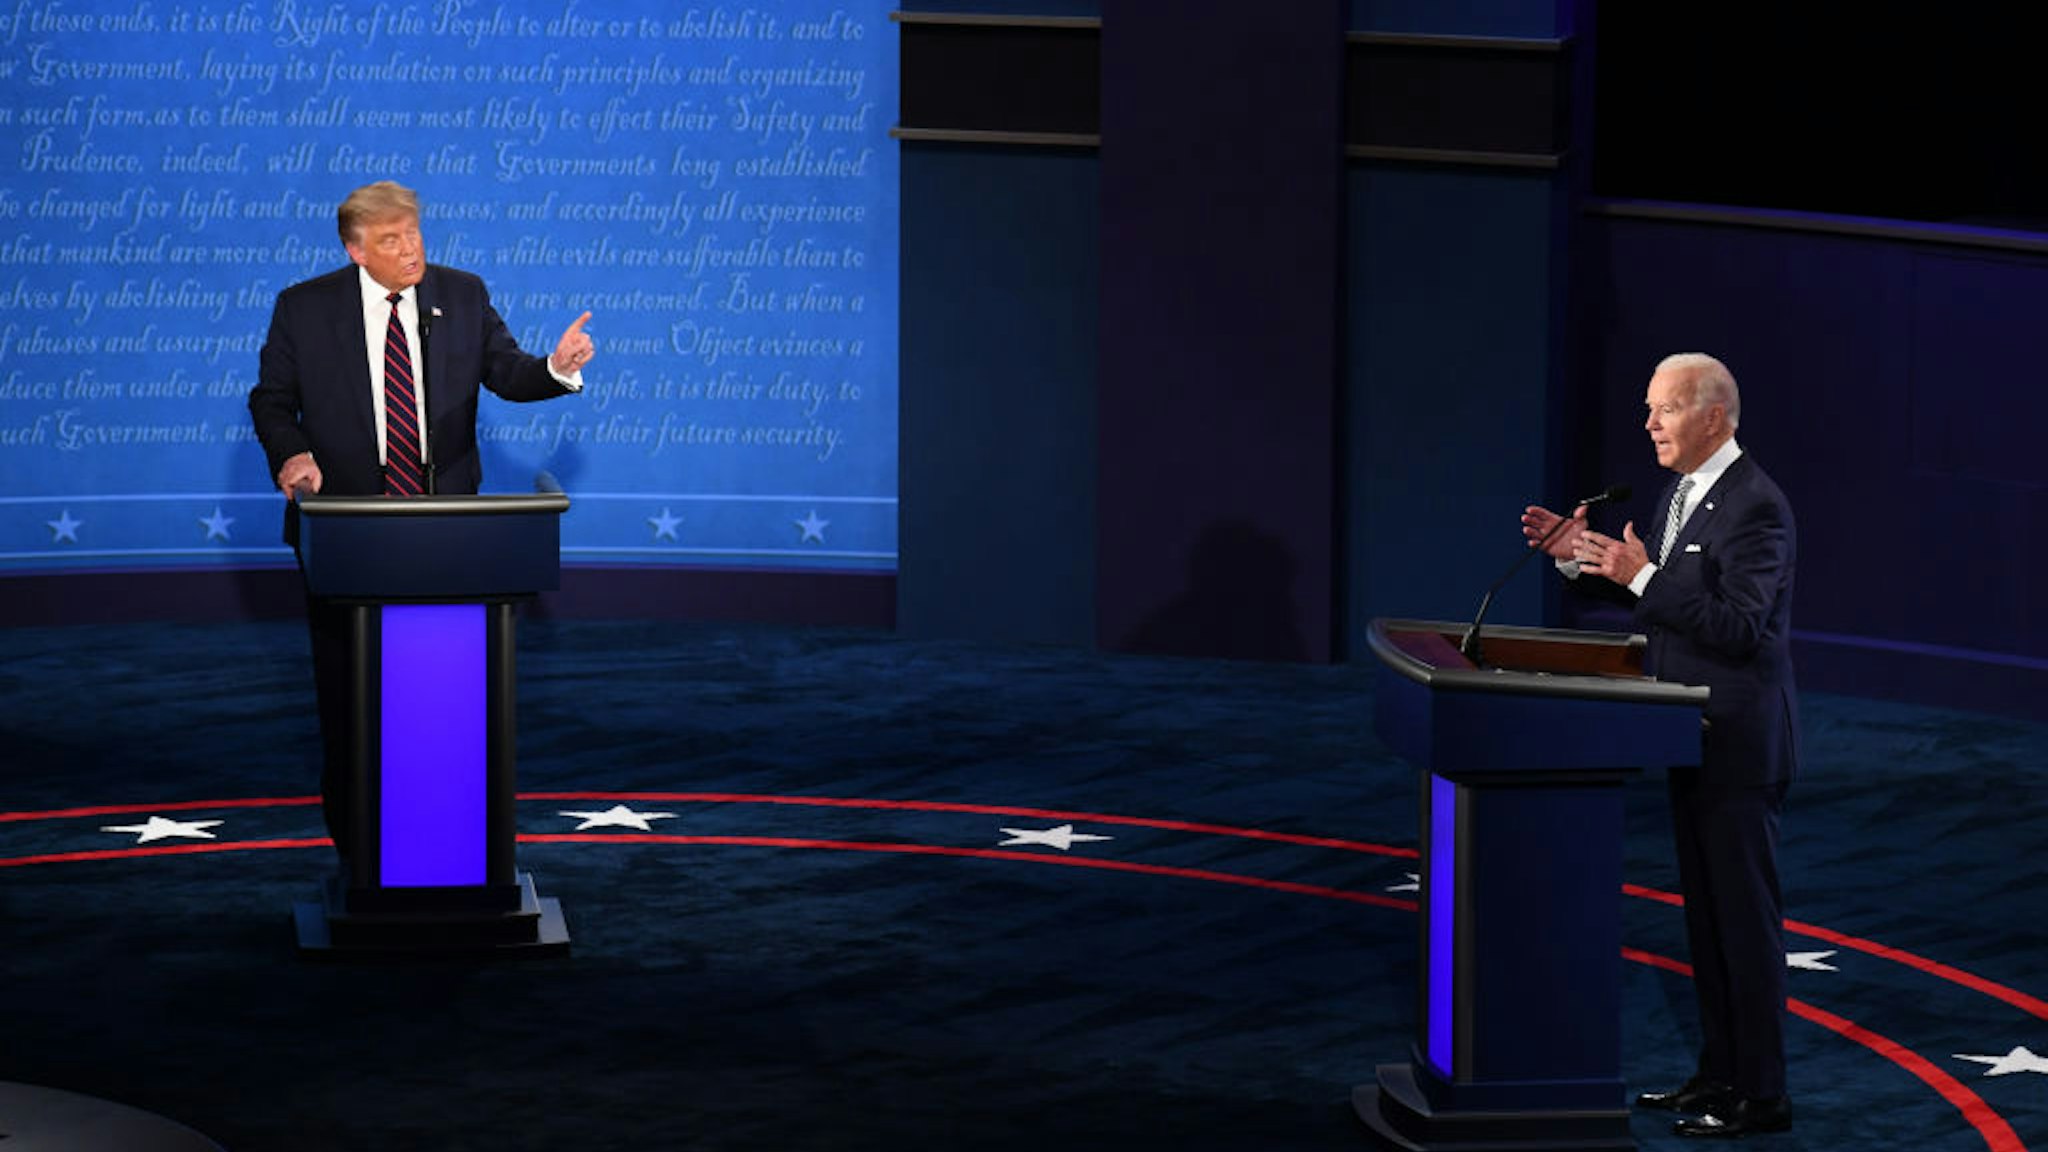 Joe Biden, 2020 Democratic presidential nominee, right, and U.S. President Donald Trump speak during the first U.S. presidential debate hosted by Case Western Reserve University and the Cleveland Clinic in Cleveland, Ohio, U.S., on Tuesday, Sept. 29, 2020. Trump and Biden kick off their first debate with contentious topics like the Supreme Court and the coronavirus pandemic suddenly joined by yet another potentially explosive question -- whether the president ducked paying his taxes. Photographer: Kevin Dietsch/UPI/Bloomberg via Getty Images